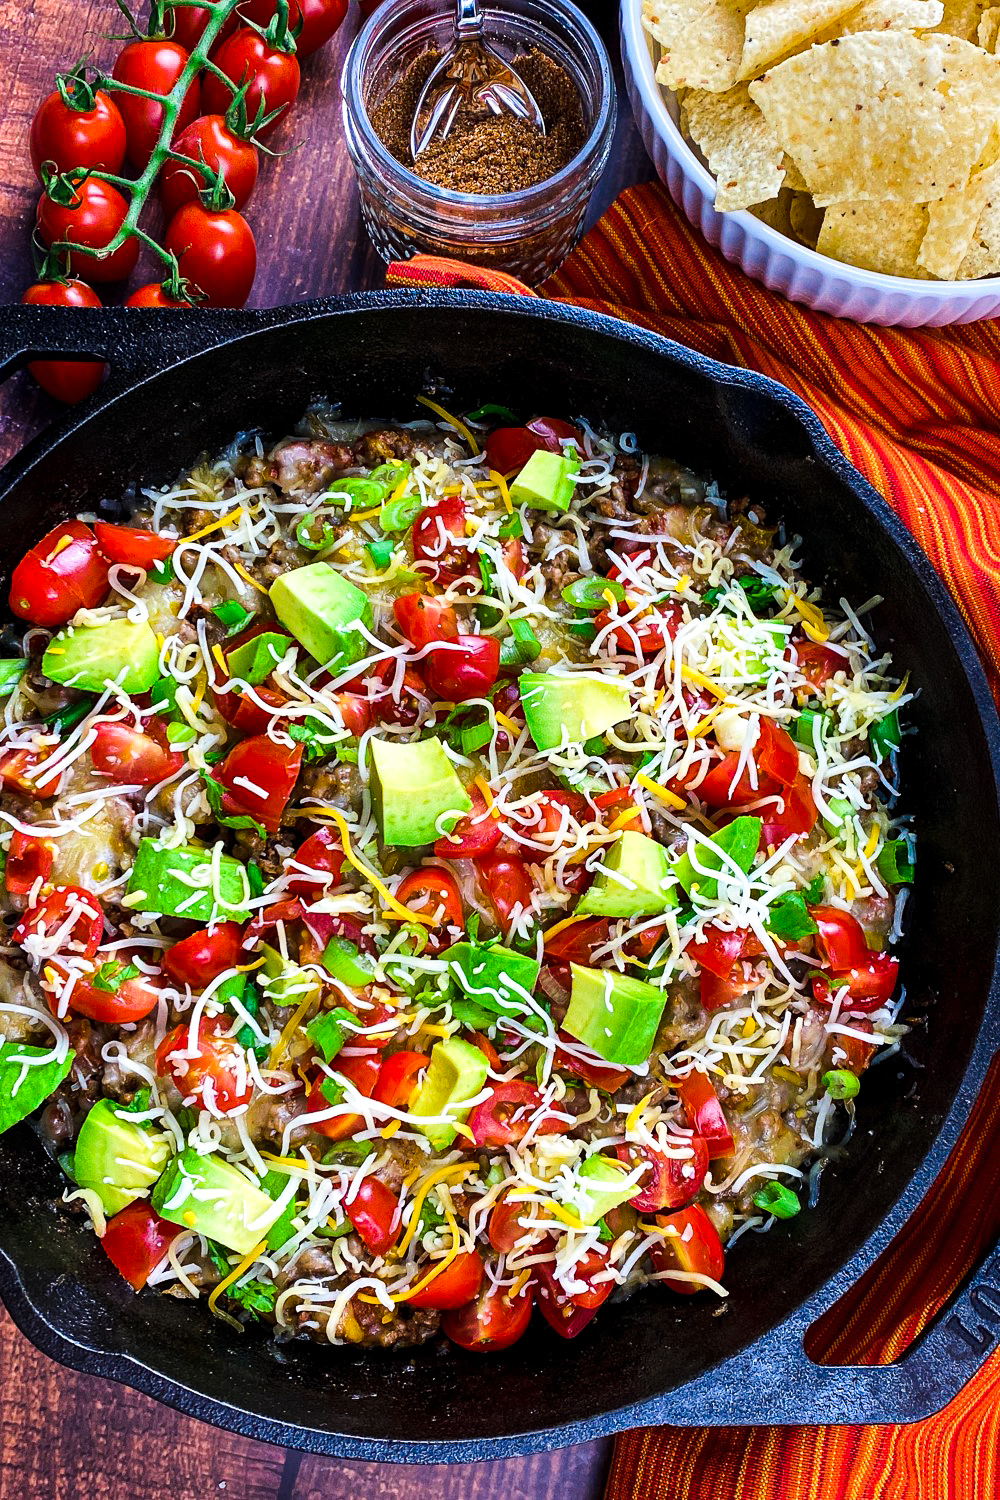 This recipe for an easy beef taco skillet makes a hearty family meal or serve with tortilla chips instead for an addictive appetizer!